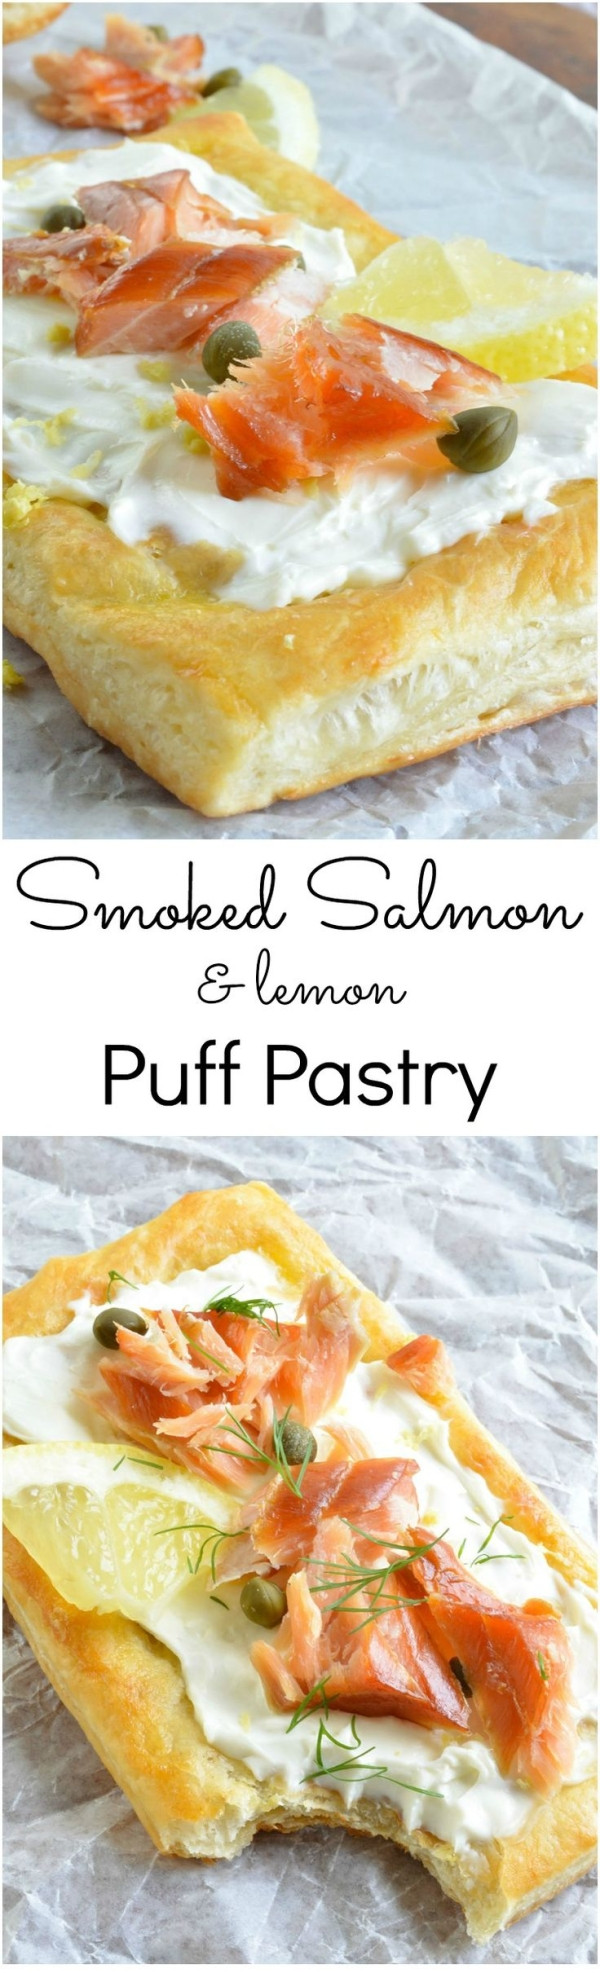 Puff Pastry Appetizers With Cream Cheese
 This Easy Smoked Salmon Appetizer Recipe begins with flaky